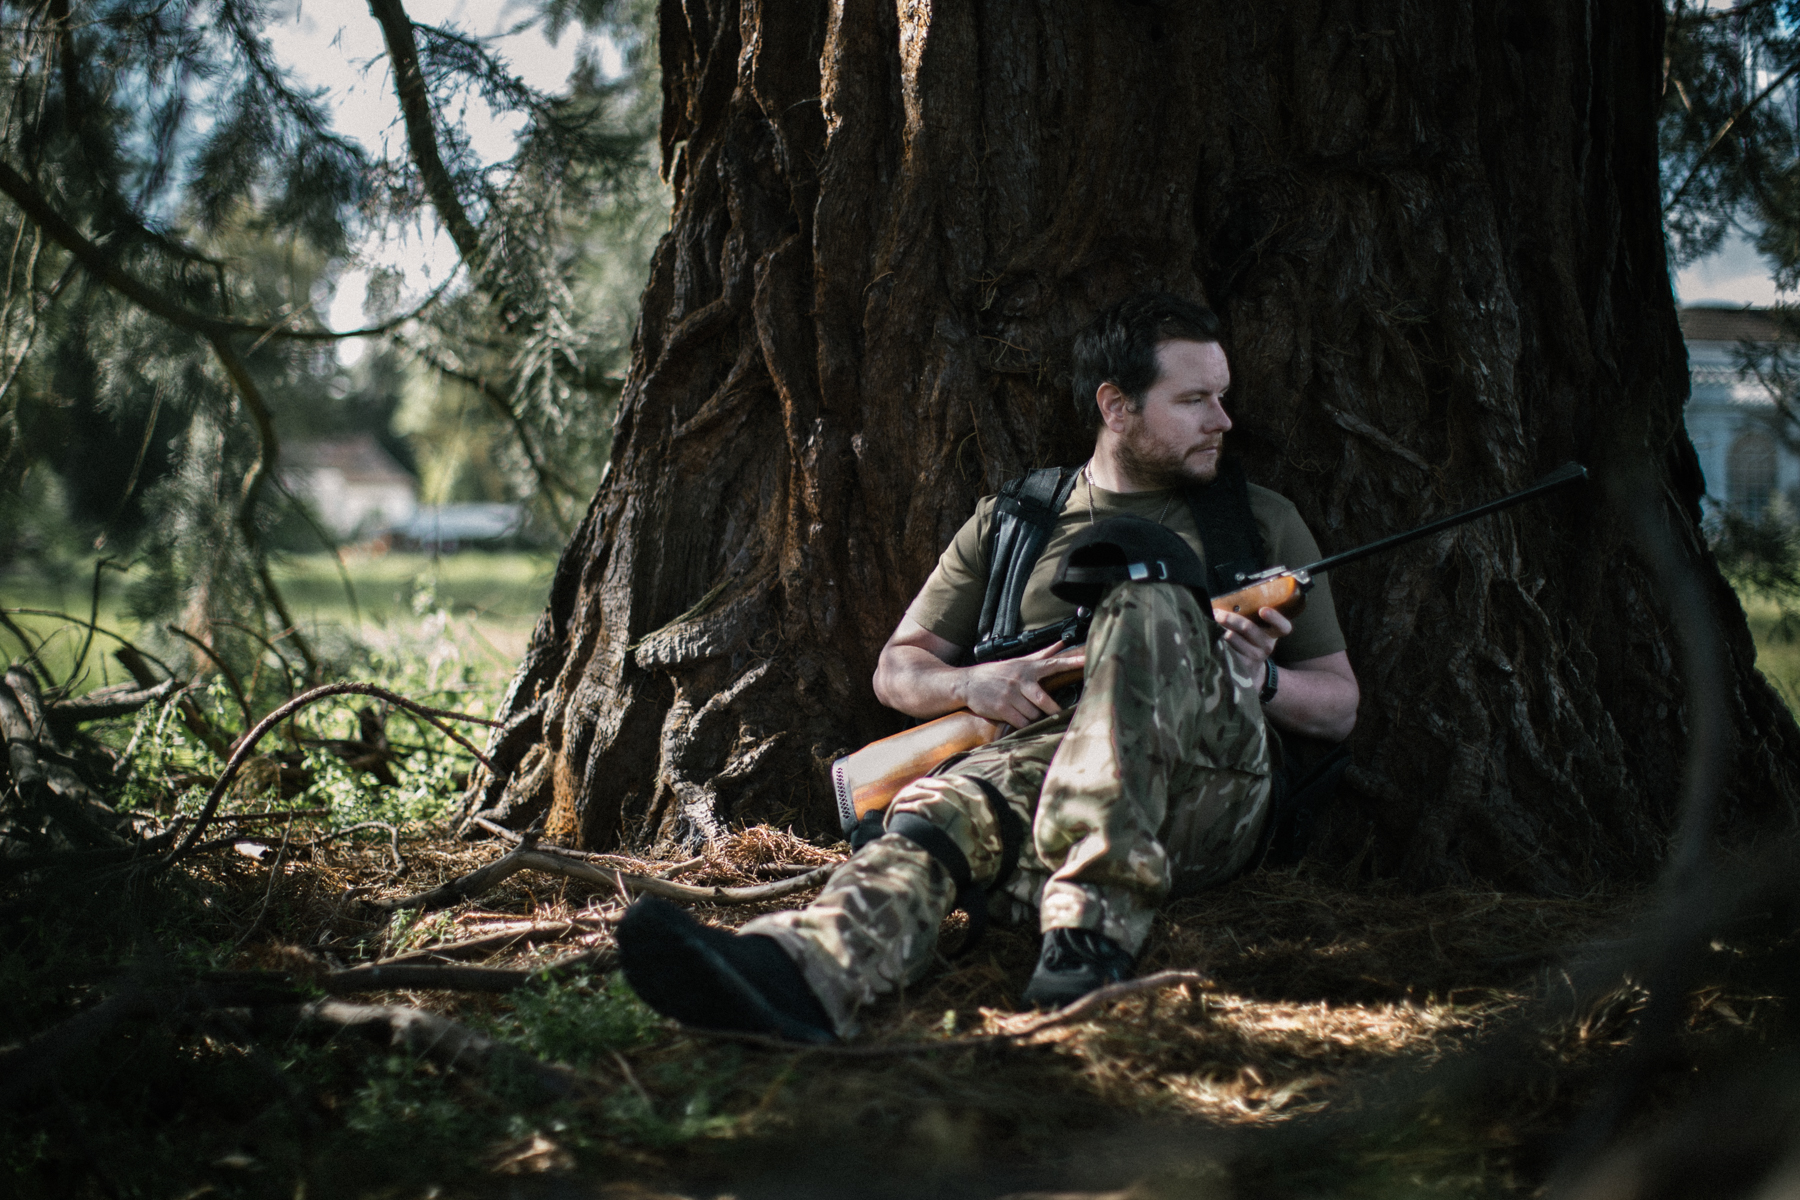 BA Photography work by Callum Broomhead showing a JPEG image of a sniper taking cover behind a large tree.